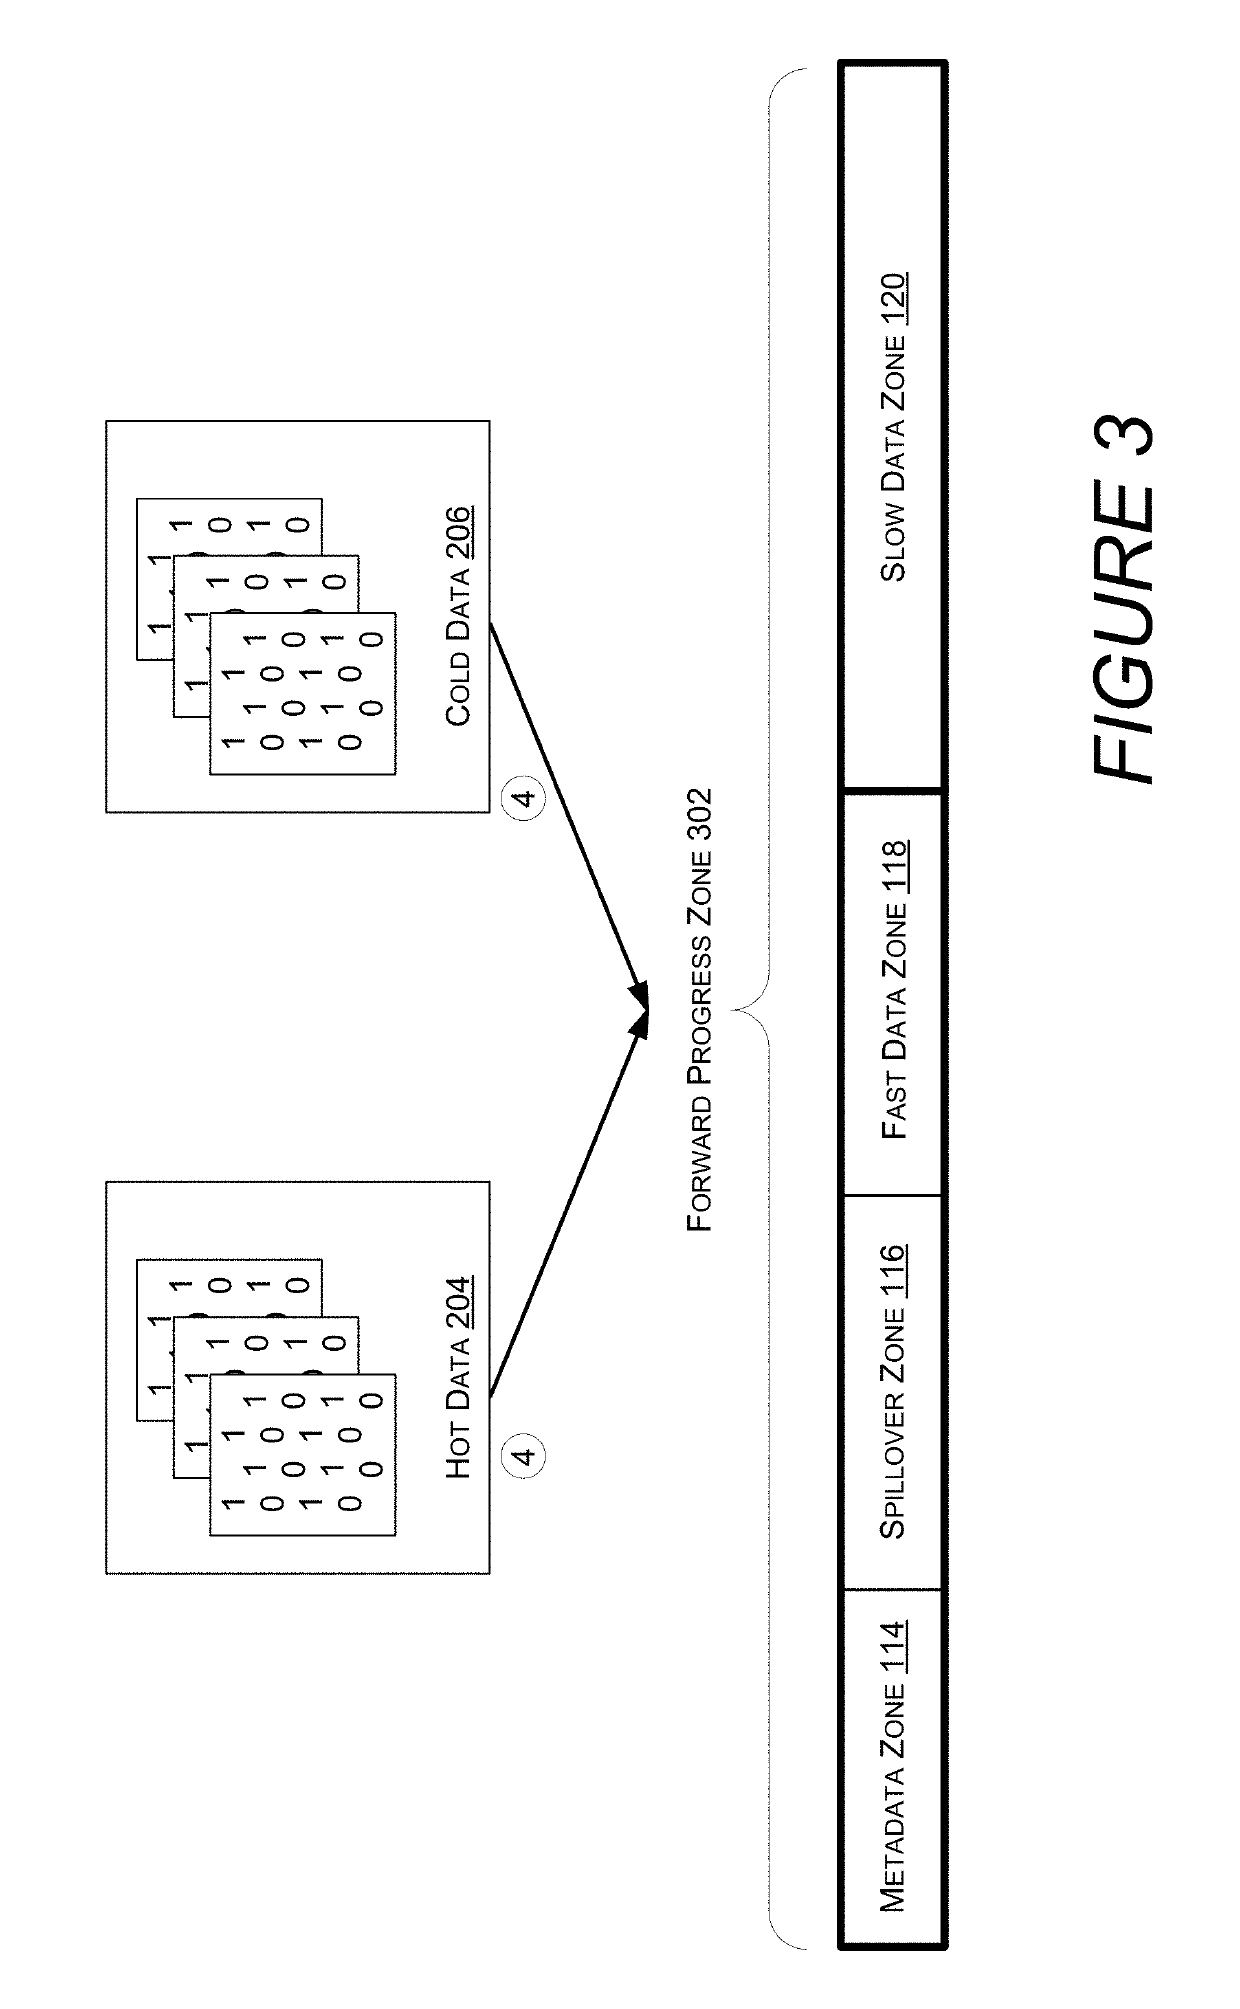 Central processing unit cache friendly multithreaded allocation